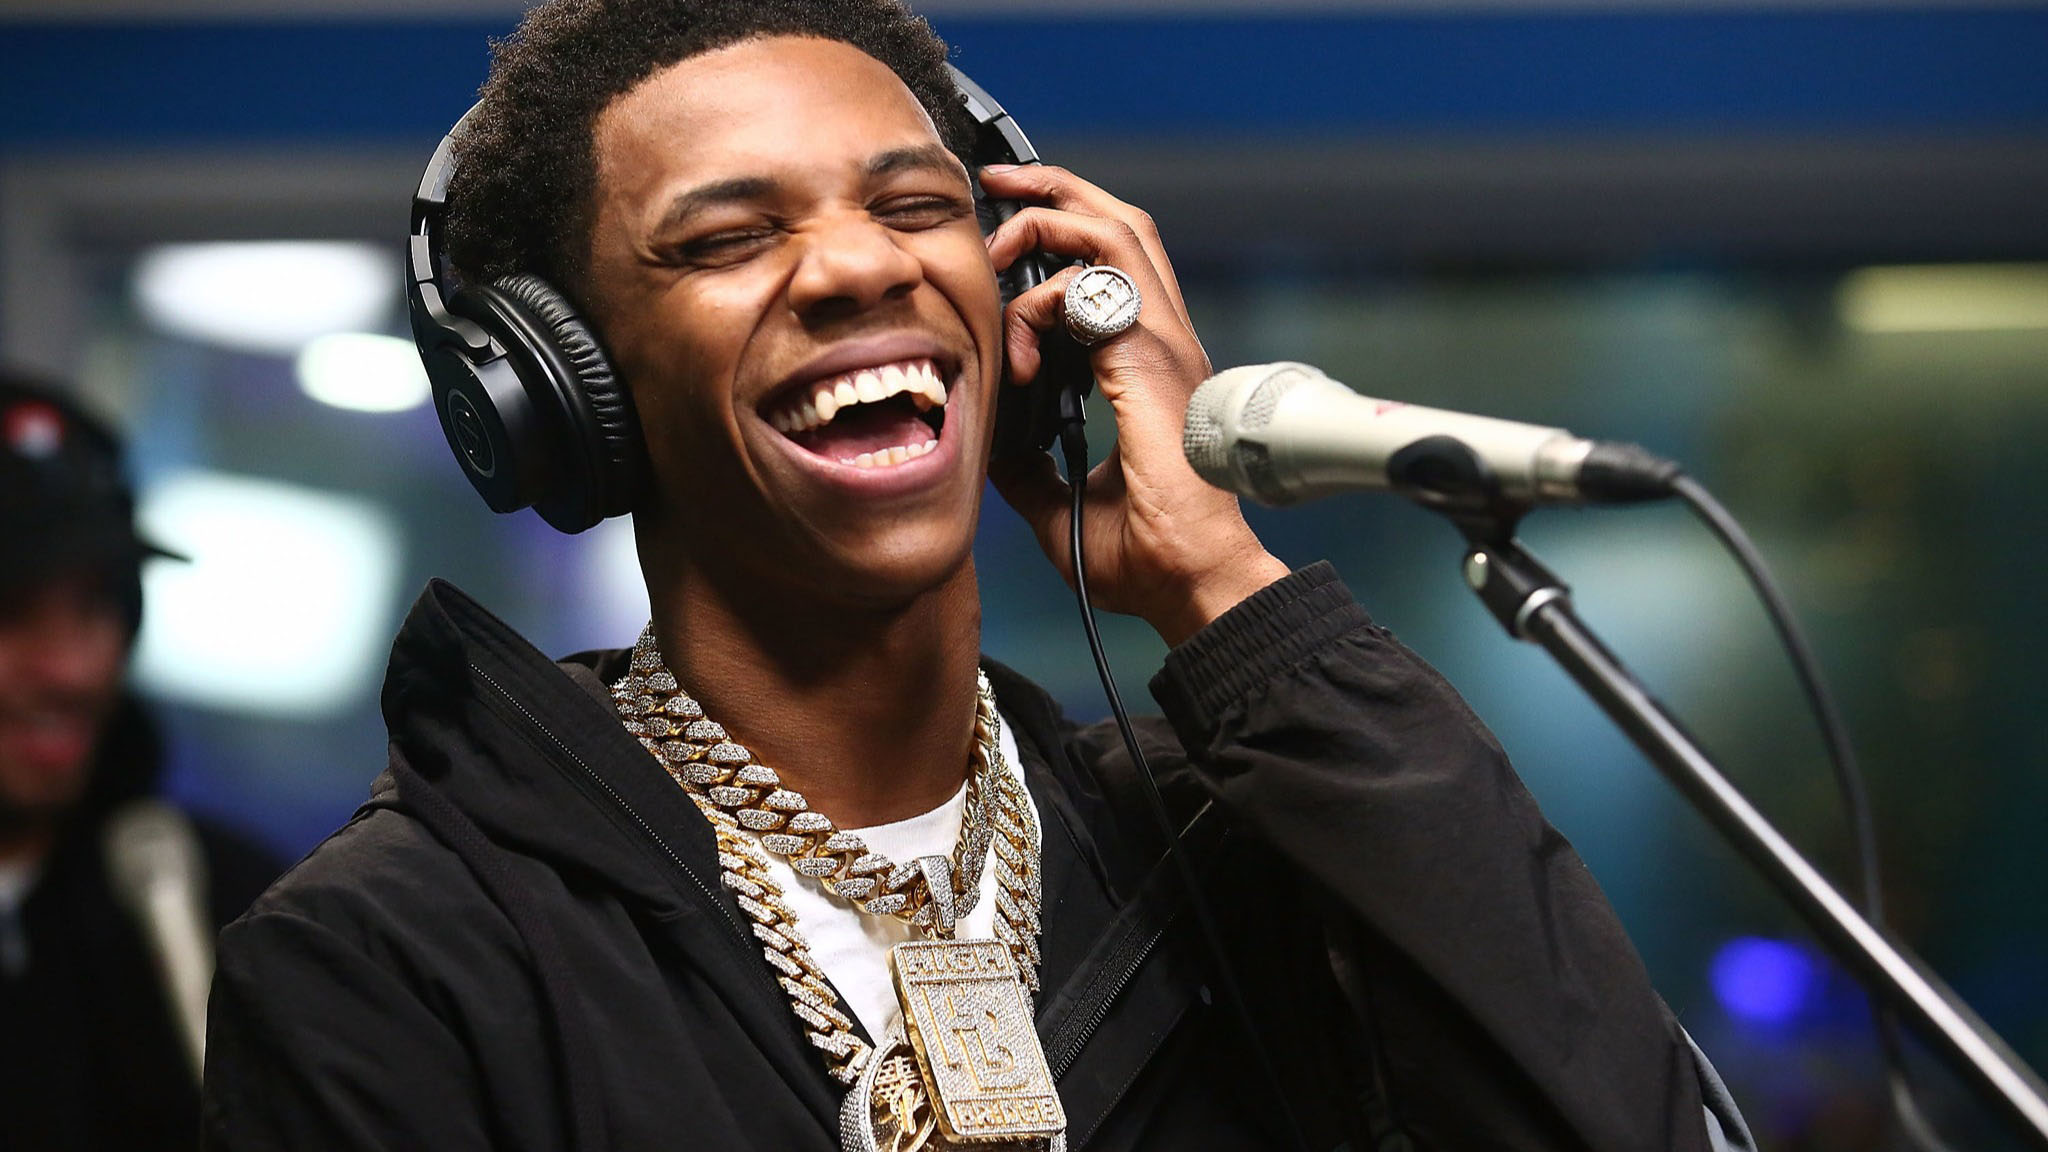 Artist Julius Dubose (born December 6, 1995), known professionally as A Boogie wit da Hoodie (or simply A Boogie), is an American rapper, singer, and ...